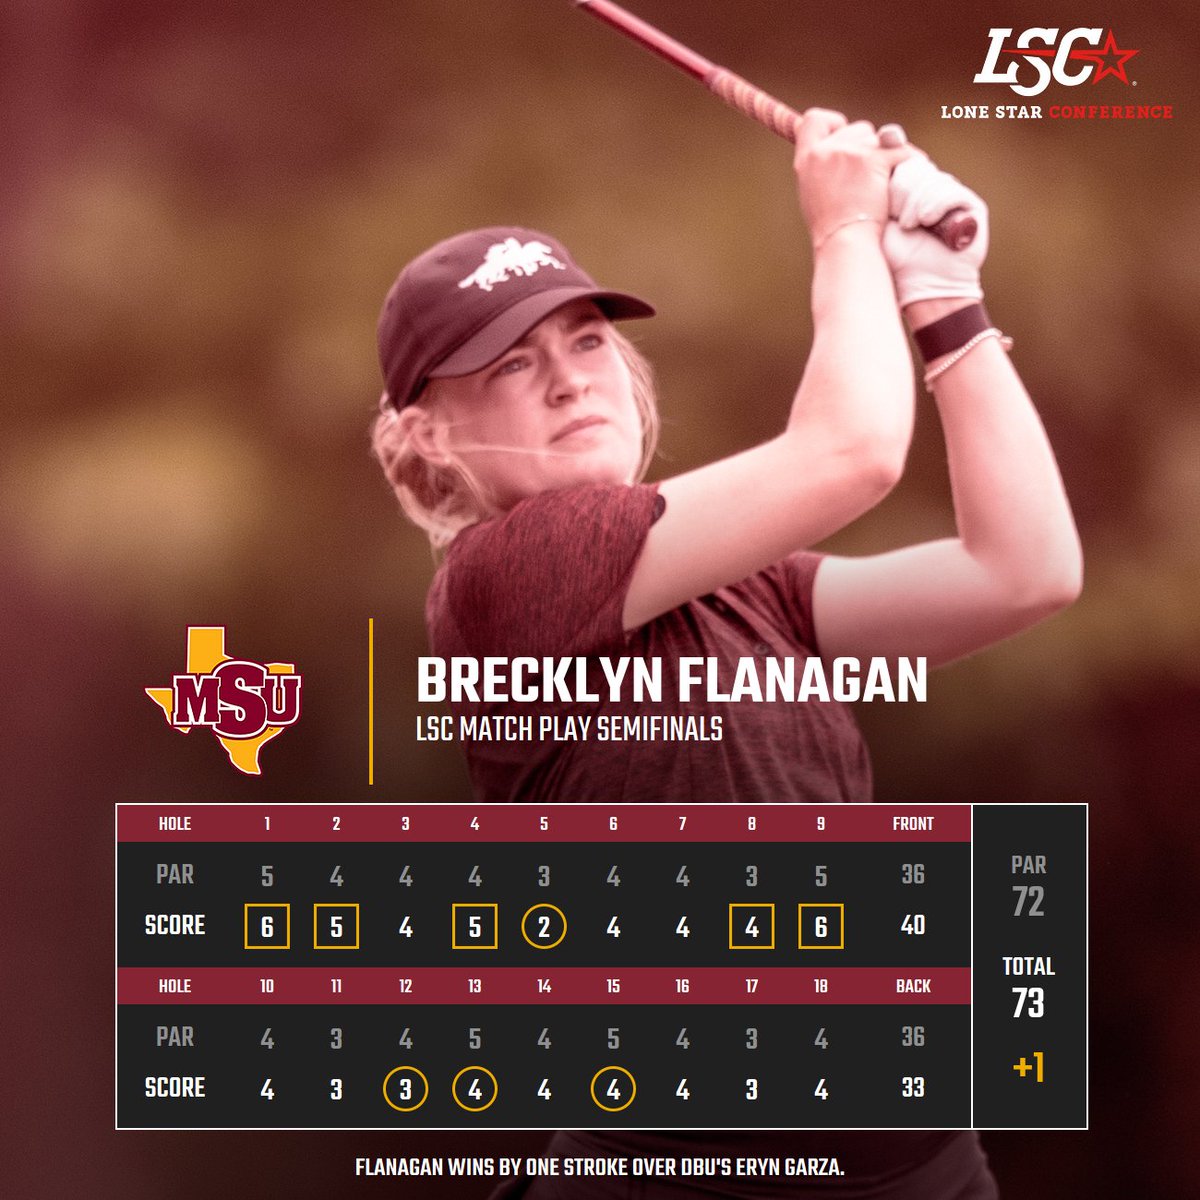 ⛳️ | Brecklyn Flanagan fires a 1-over 73 to win by one stroke over DBU's Eryn Garza. MSU pulls to within 2-1! #StangGang